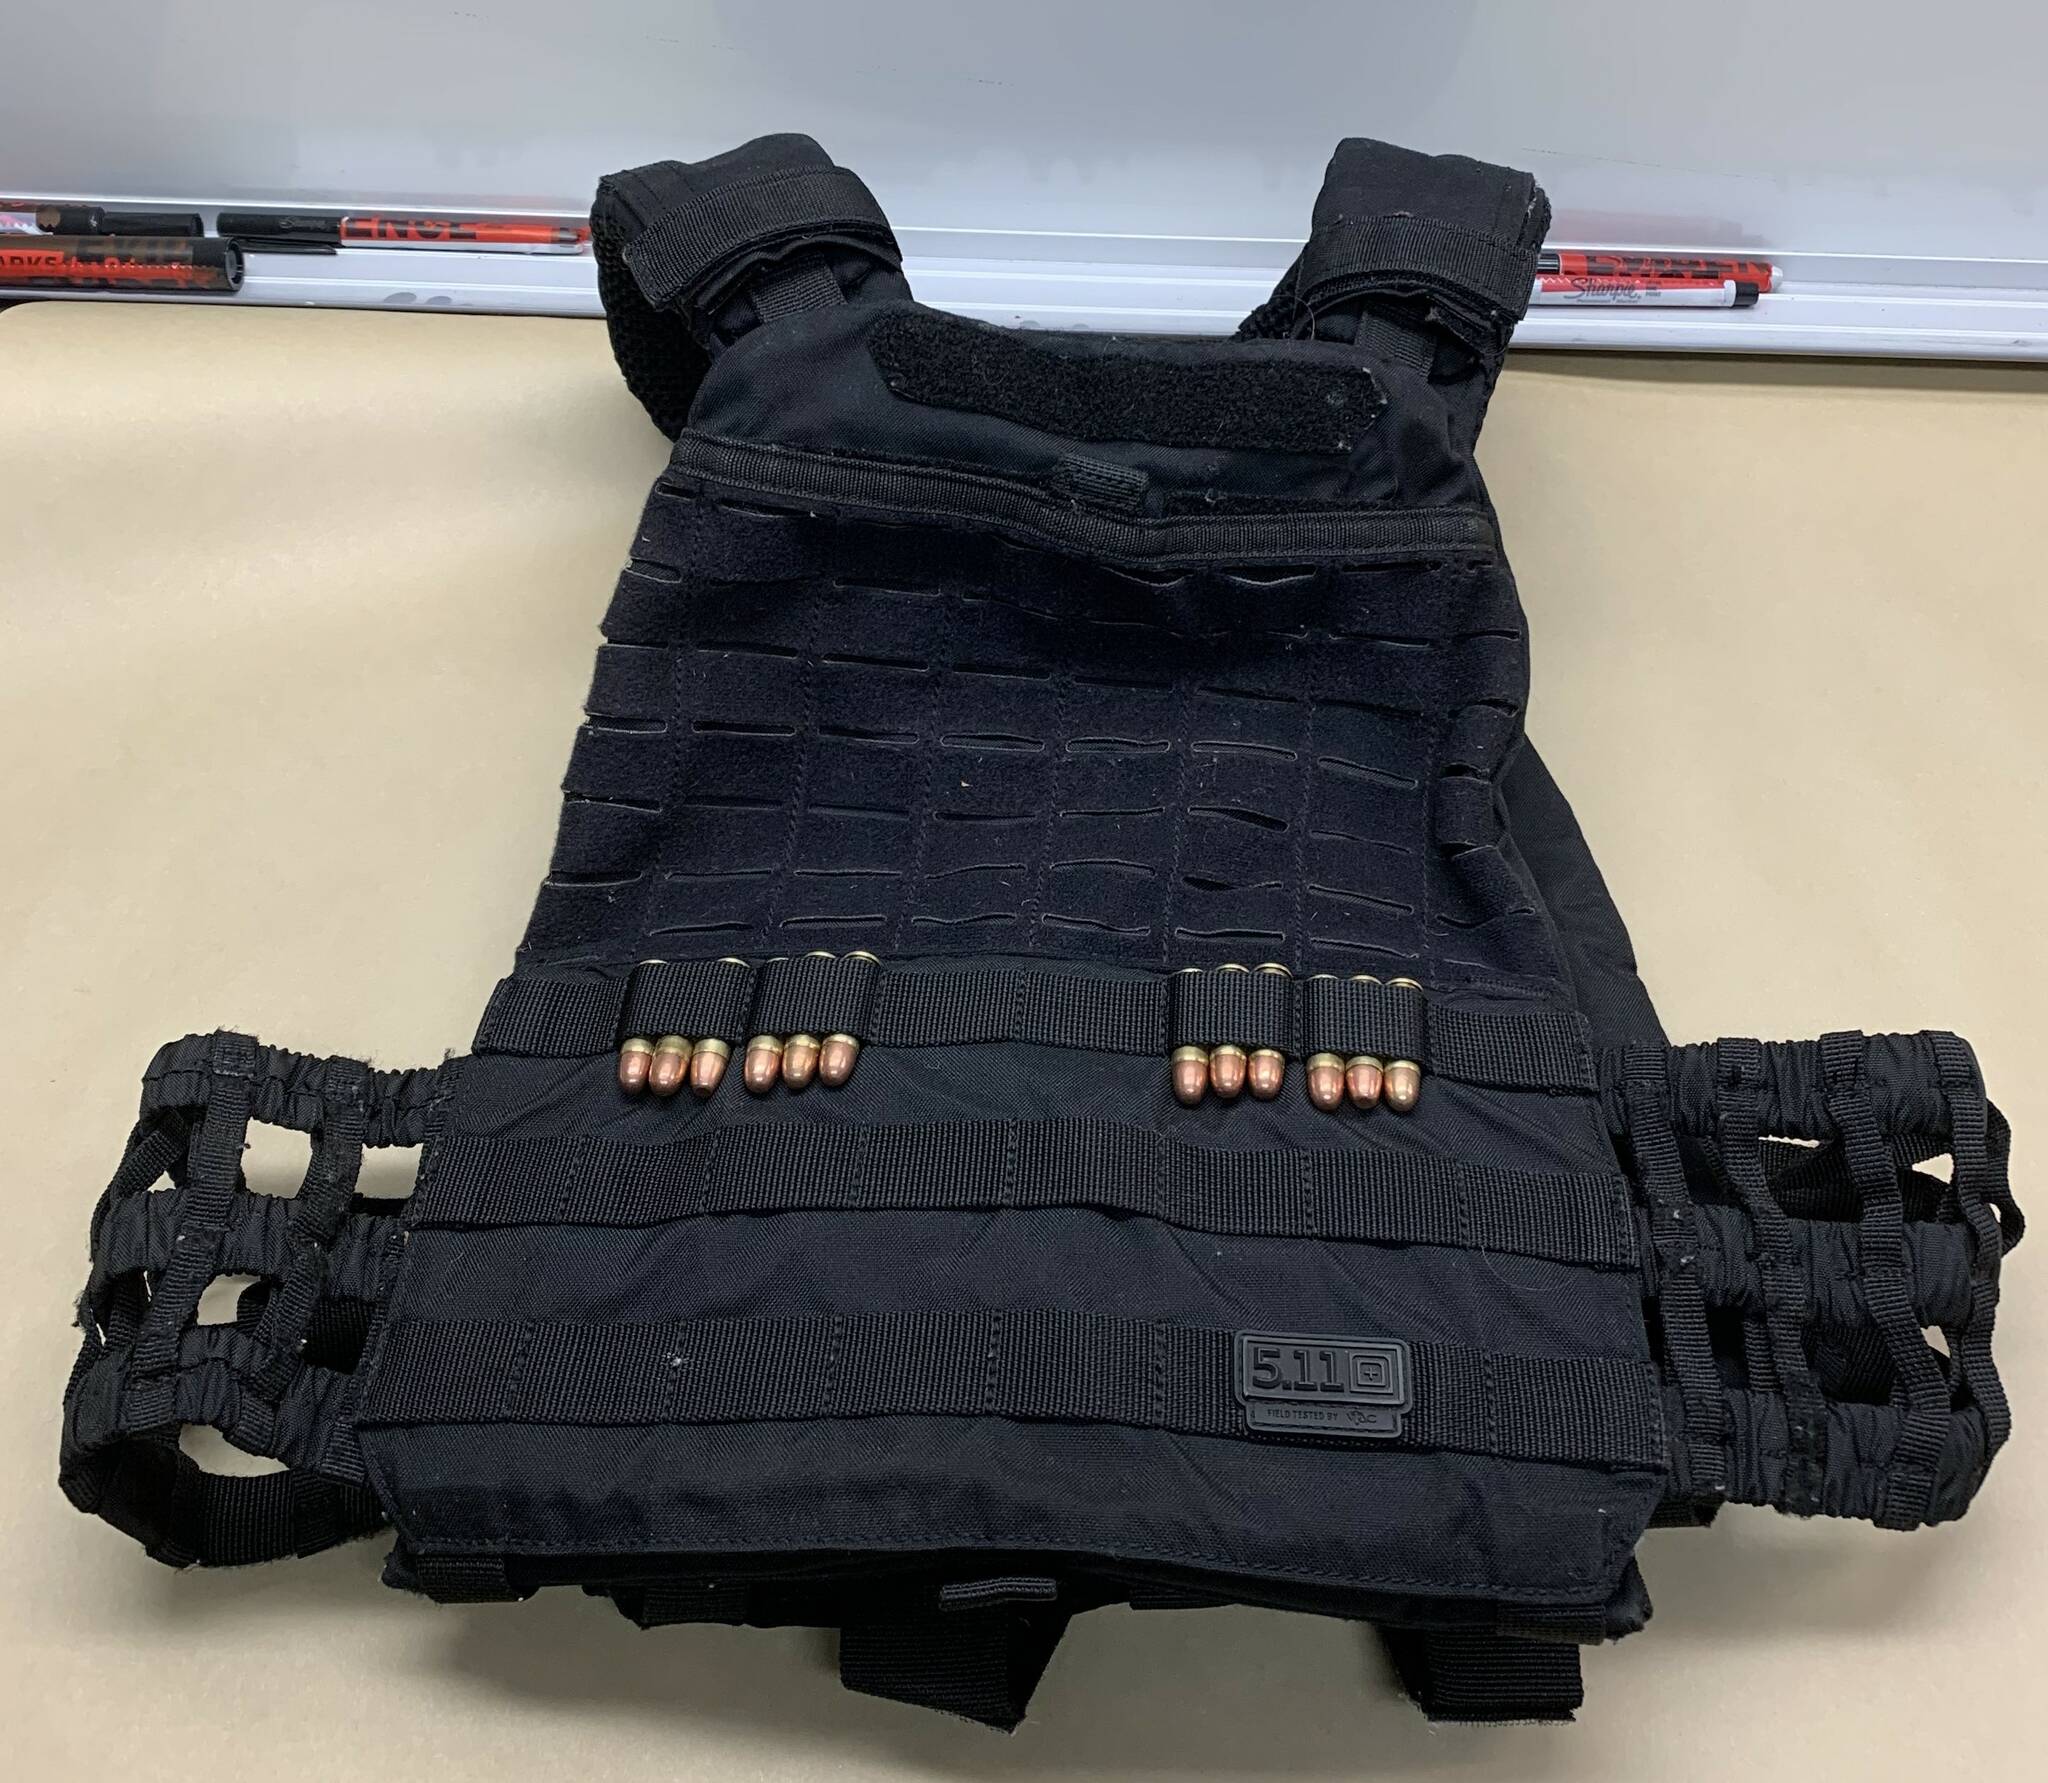 Oak Harbor police photos
A wanted man was arrested with a pistol and a tactical vest with bullets in Oak Harbor this week.